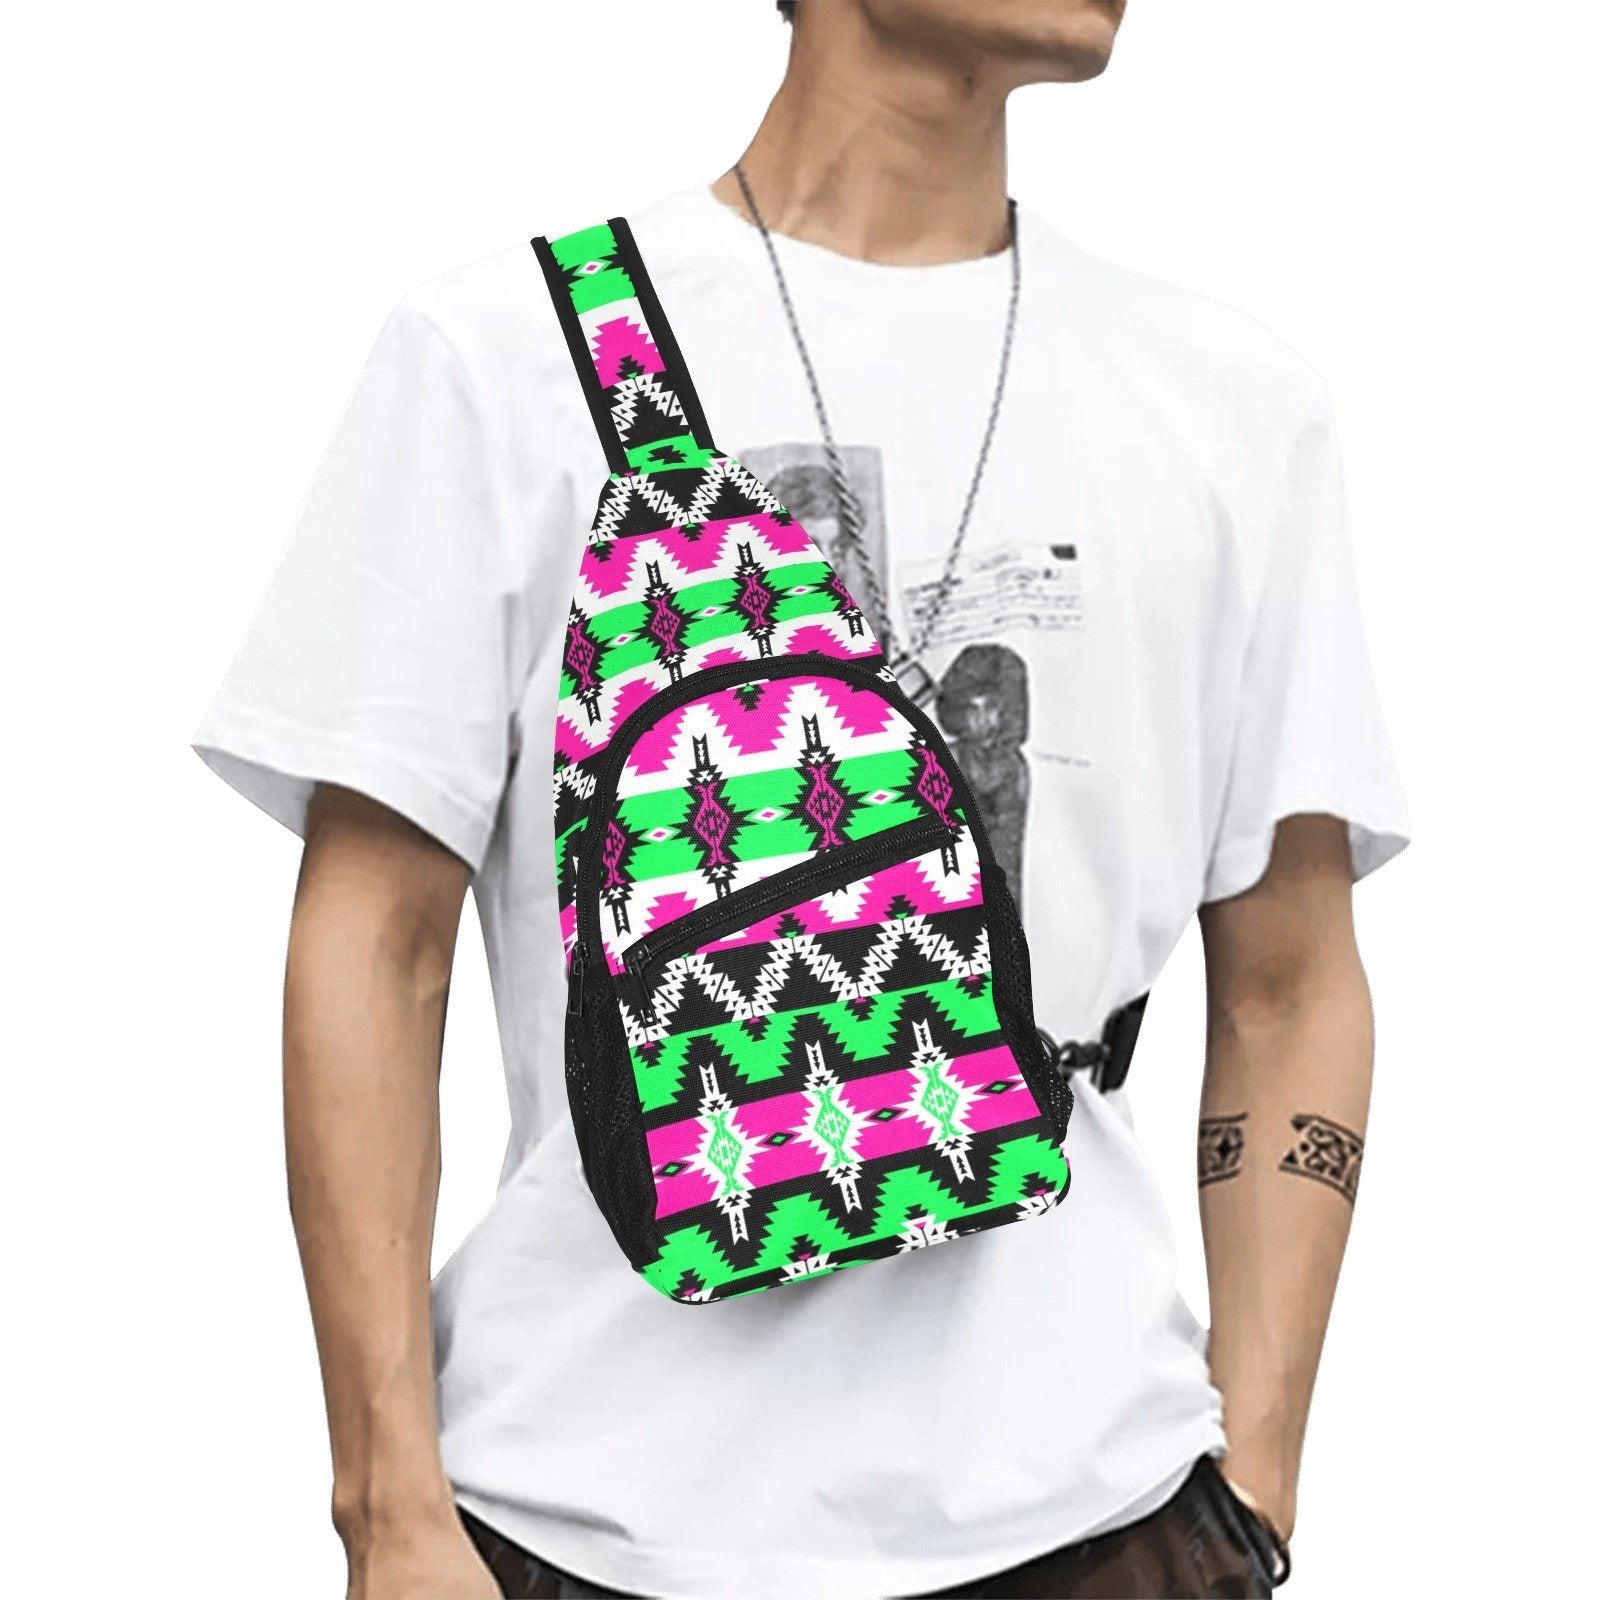 Two Spirit Ceremony All Over Print Chest Bag (Model 1719) All Over Print Chest Bag (1719) e-joyer 